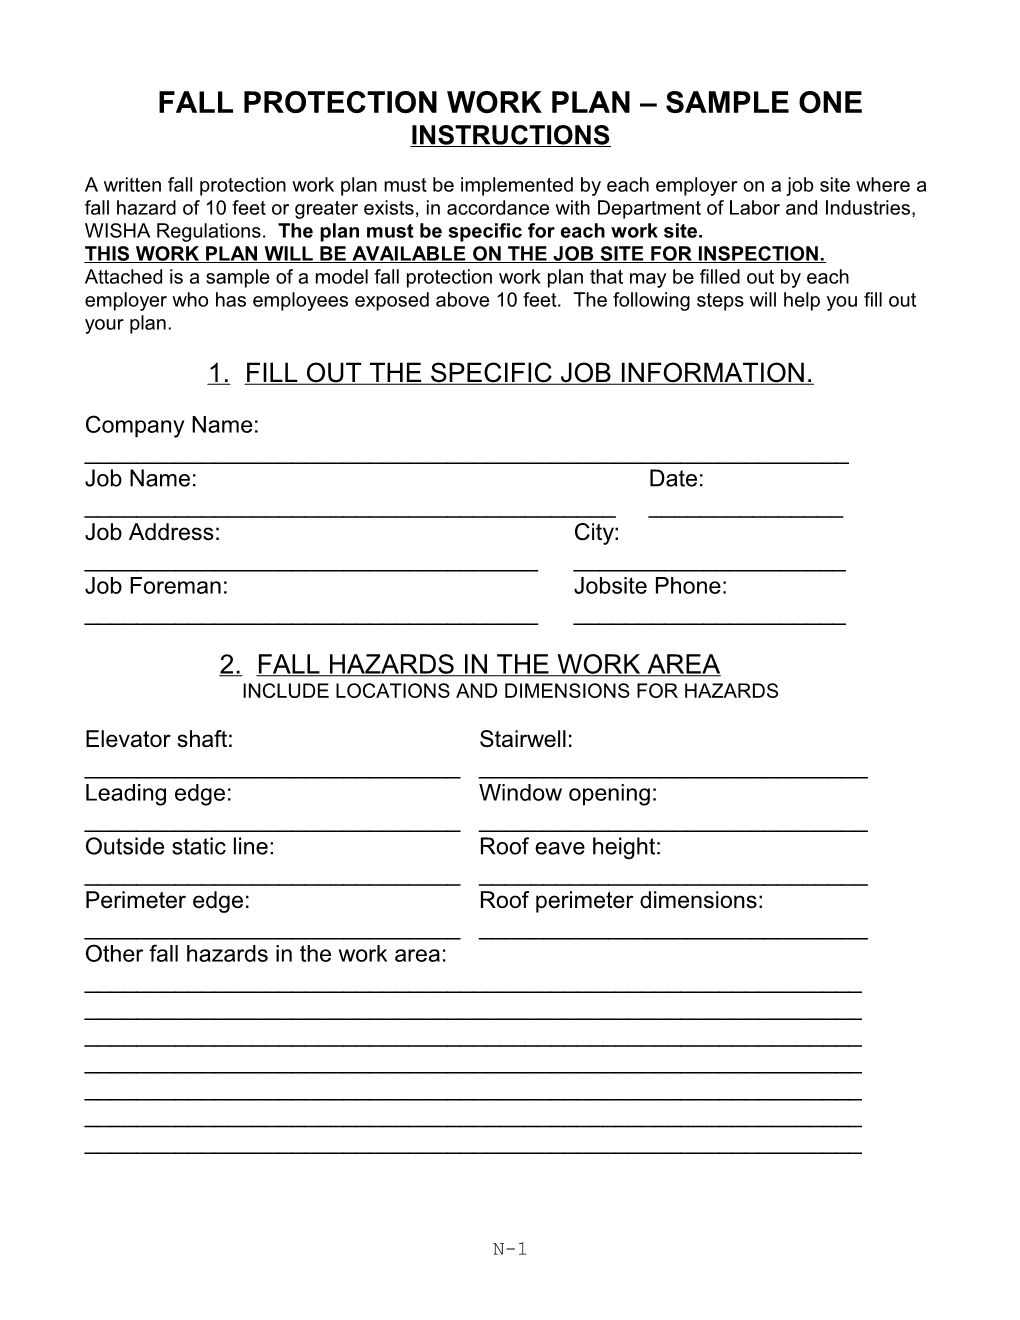 Fall Protection Work Plan (Sample One)